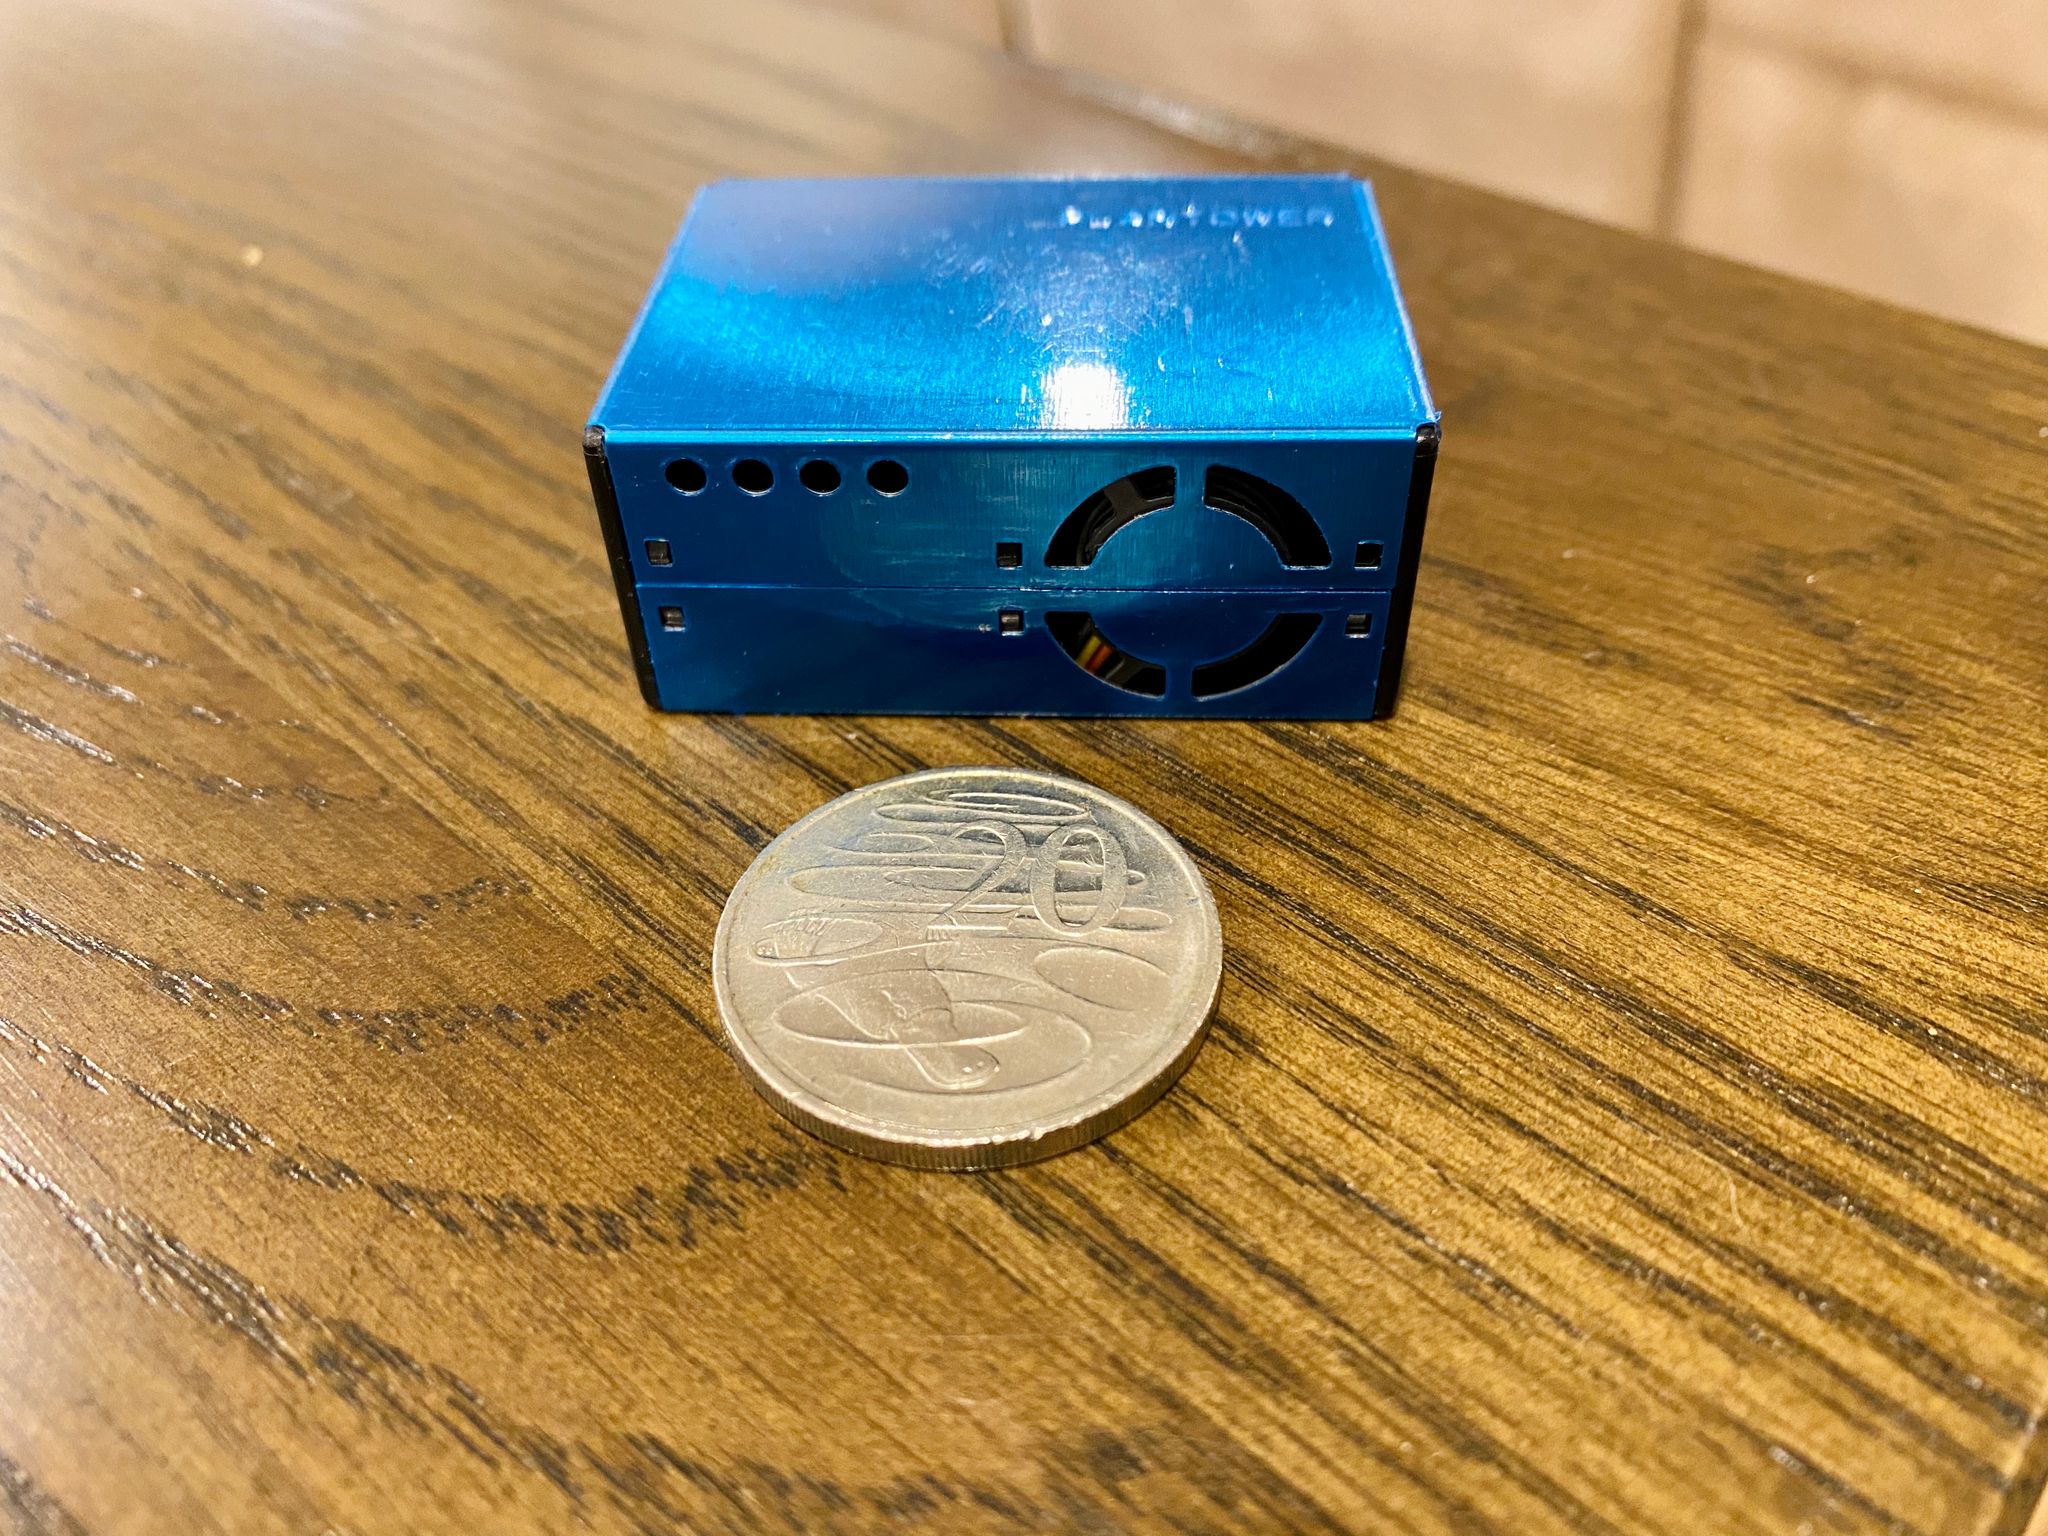 A photo of a blue box with a fan vent in it. An Australian 20c coin is sitting in front of it, and the coin is about a third of the size of the box.